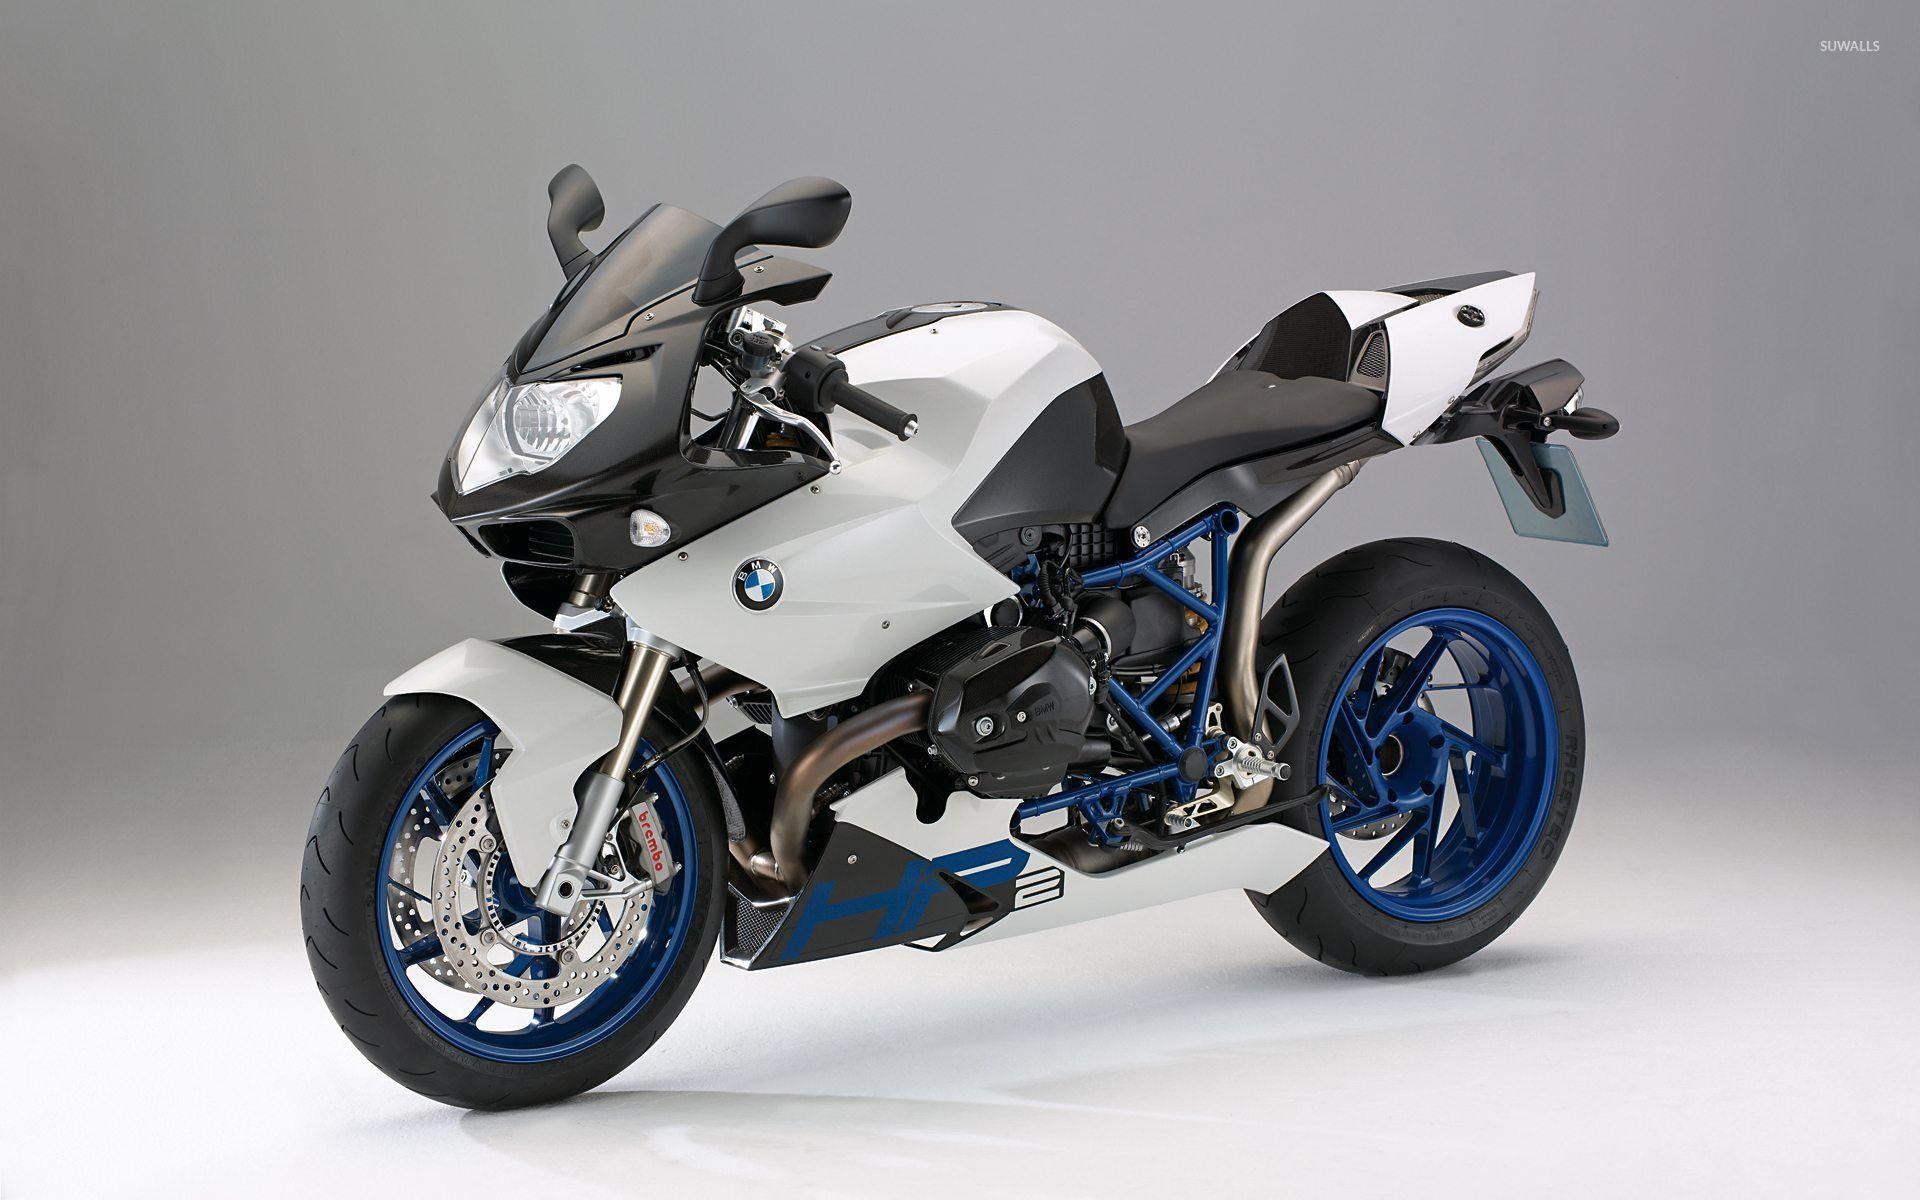 BMW Motorcycle Wallpapers - Top Free BMW Motorcycle Backgrounds